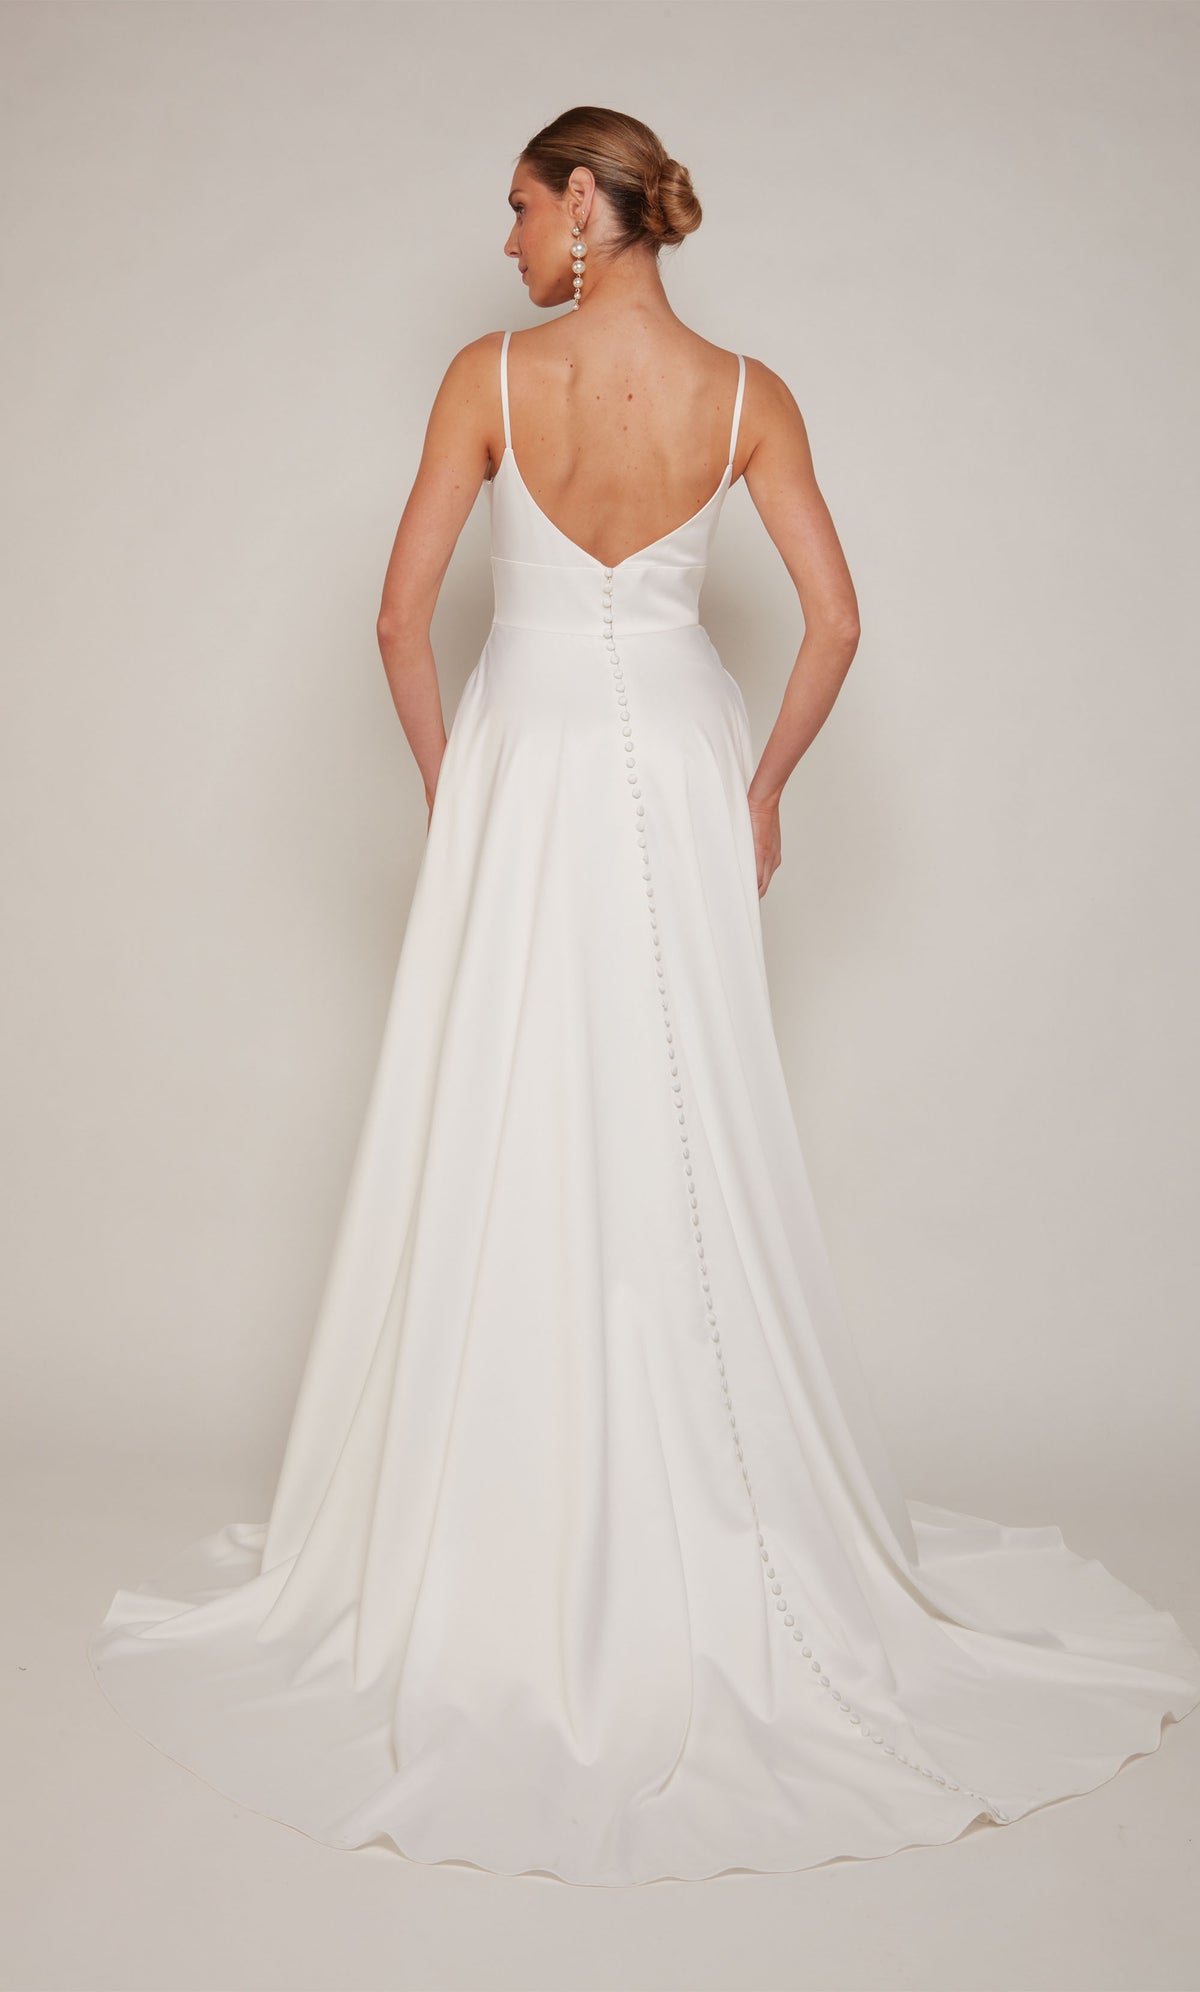 A simple, satin wedding dress with a low V-back style and satin covered buttons cascading down the back to the end of the train.